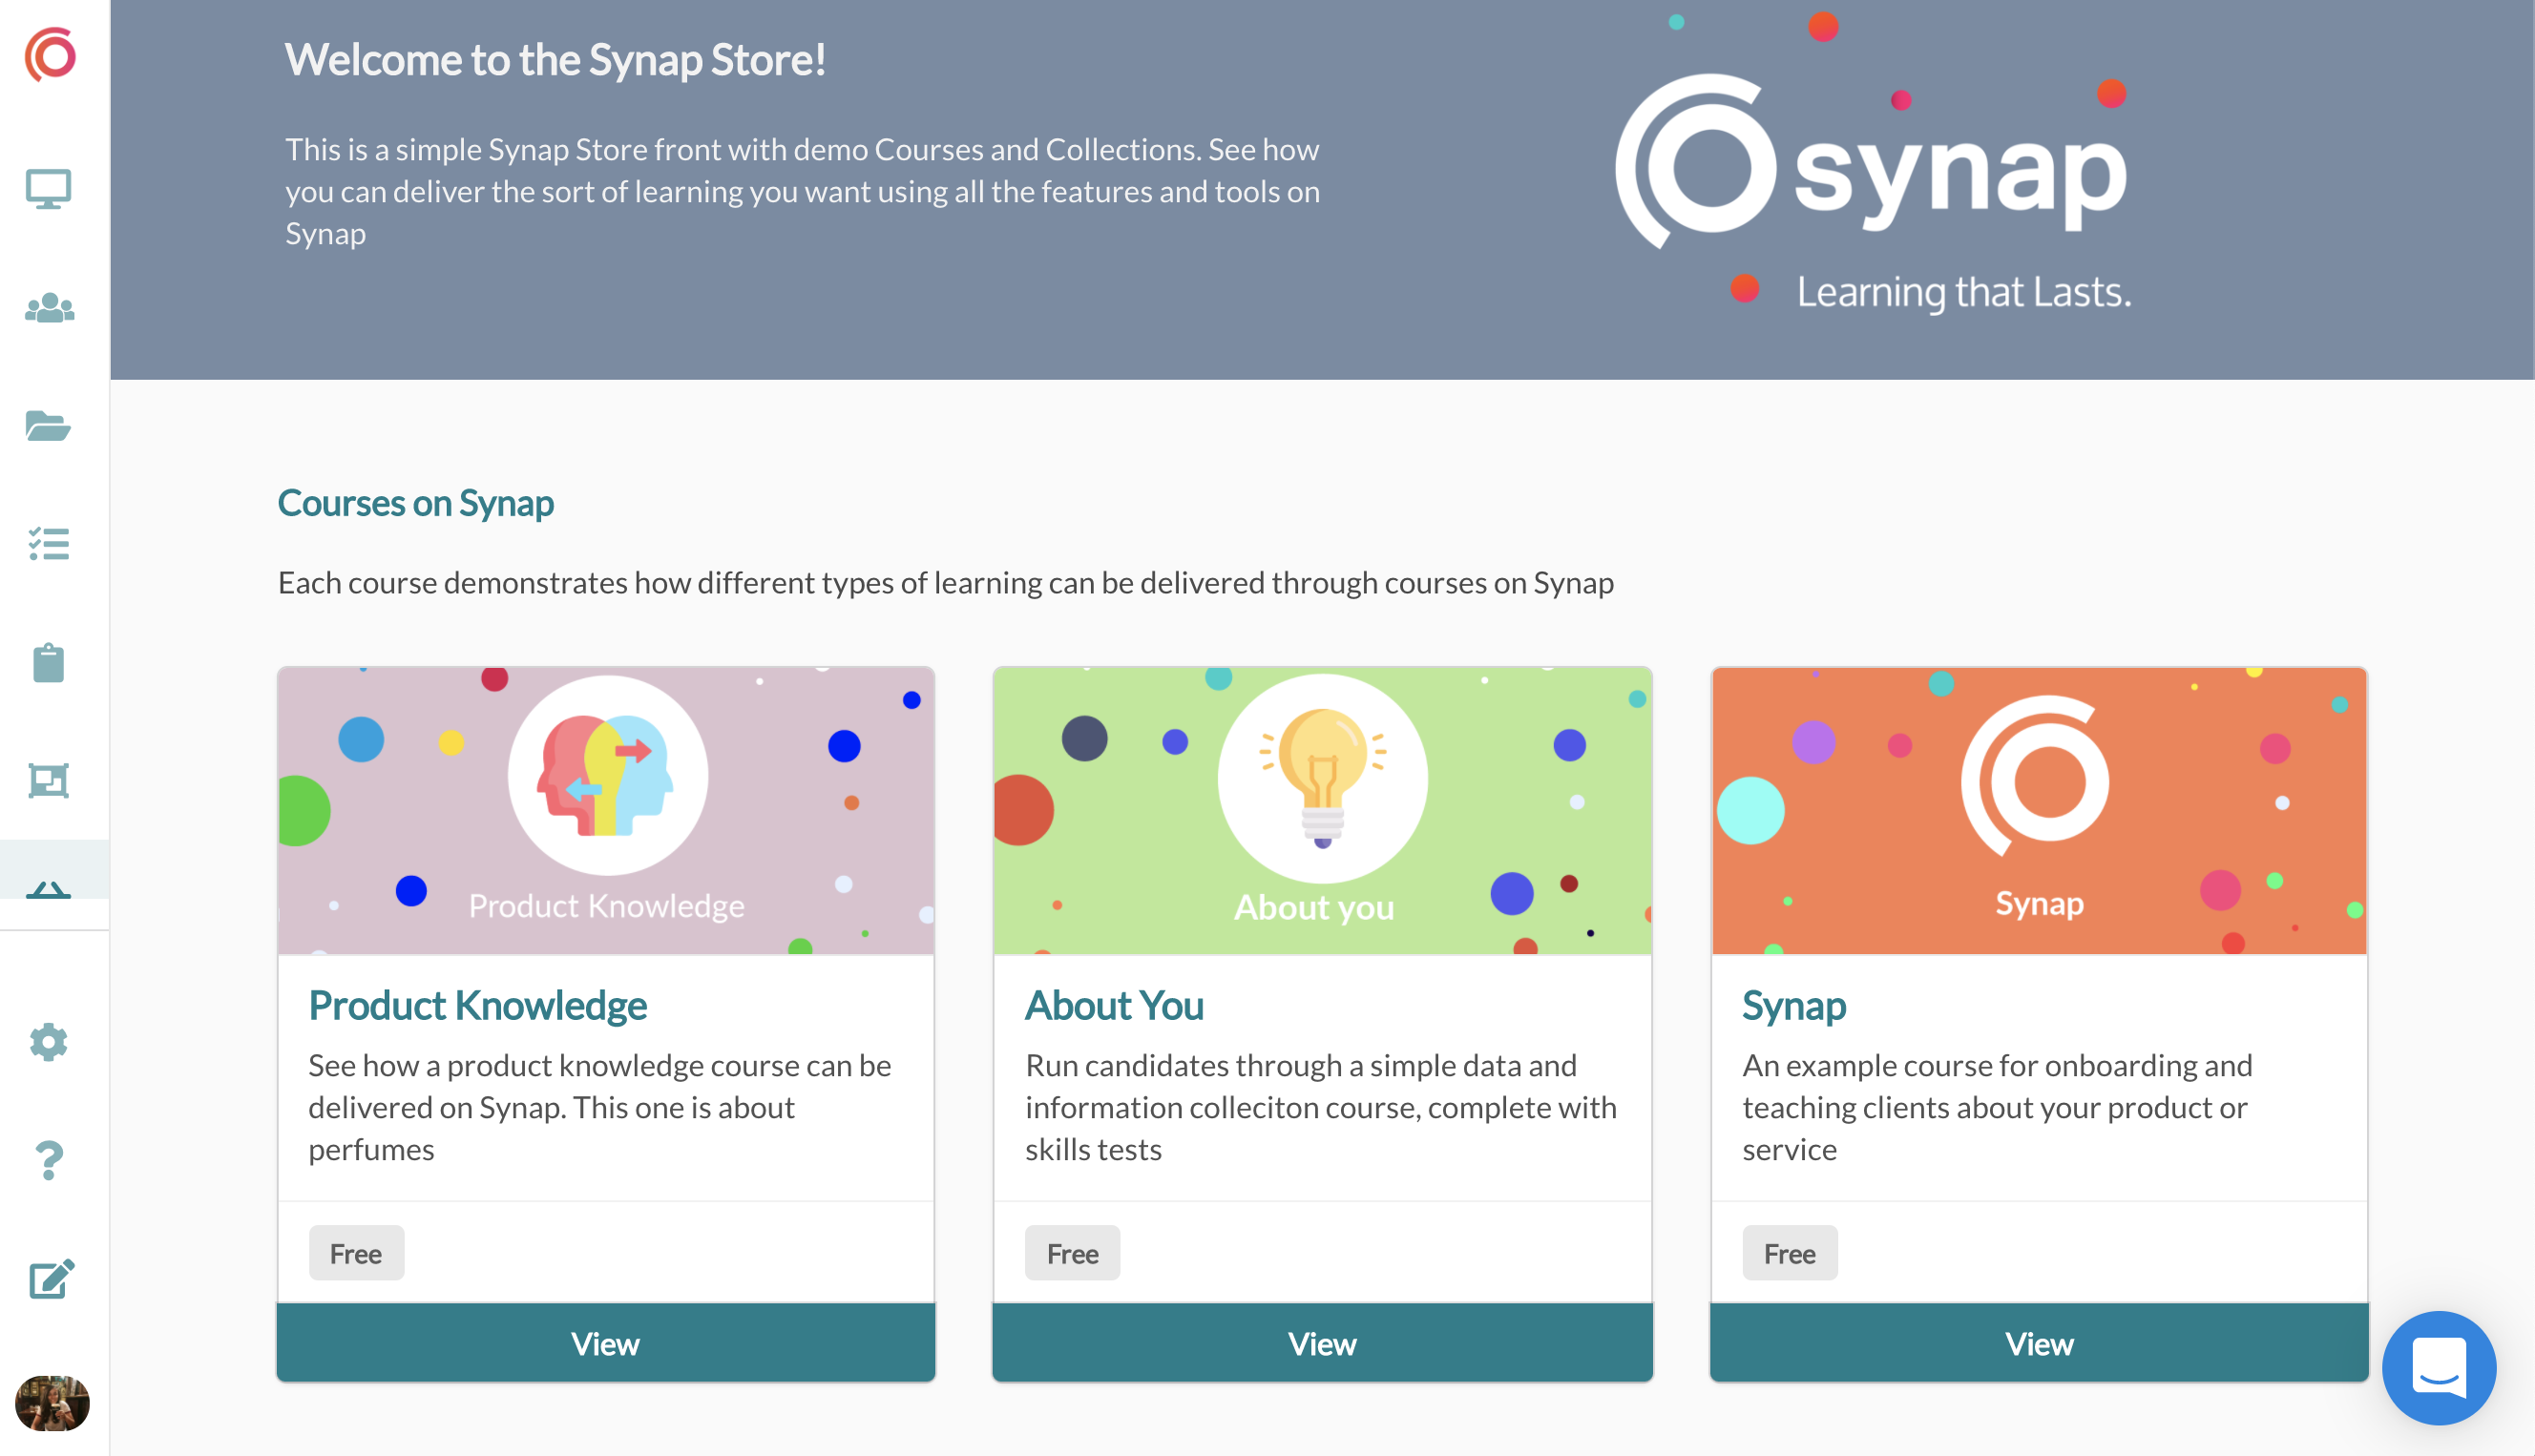 Synap Software - Scale your business with our integrated e-commerce store designed for you to upload and sell your content. Fully customise your store with banners, course titles, images, descriptions and prices